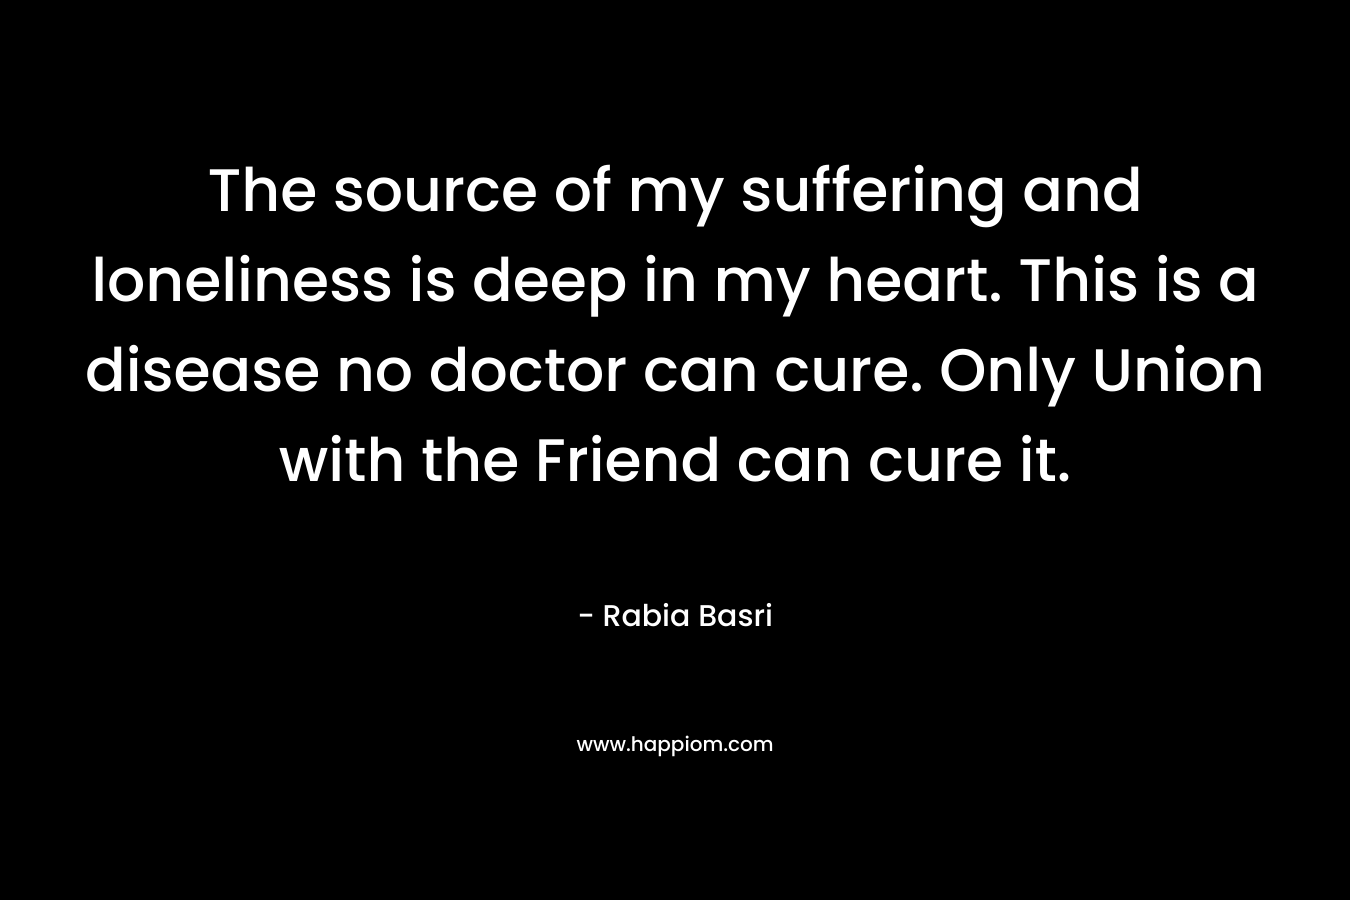 The source of my suffering and loneliness is deep in my heart. This is a disease no doctor can cure. Only Union with the Friend can cure it. – Rabia Basri